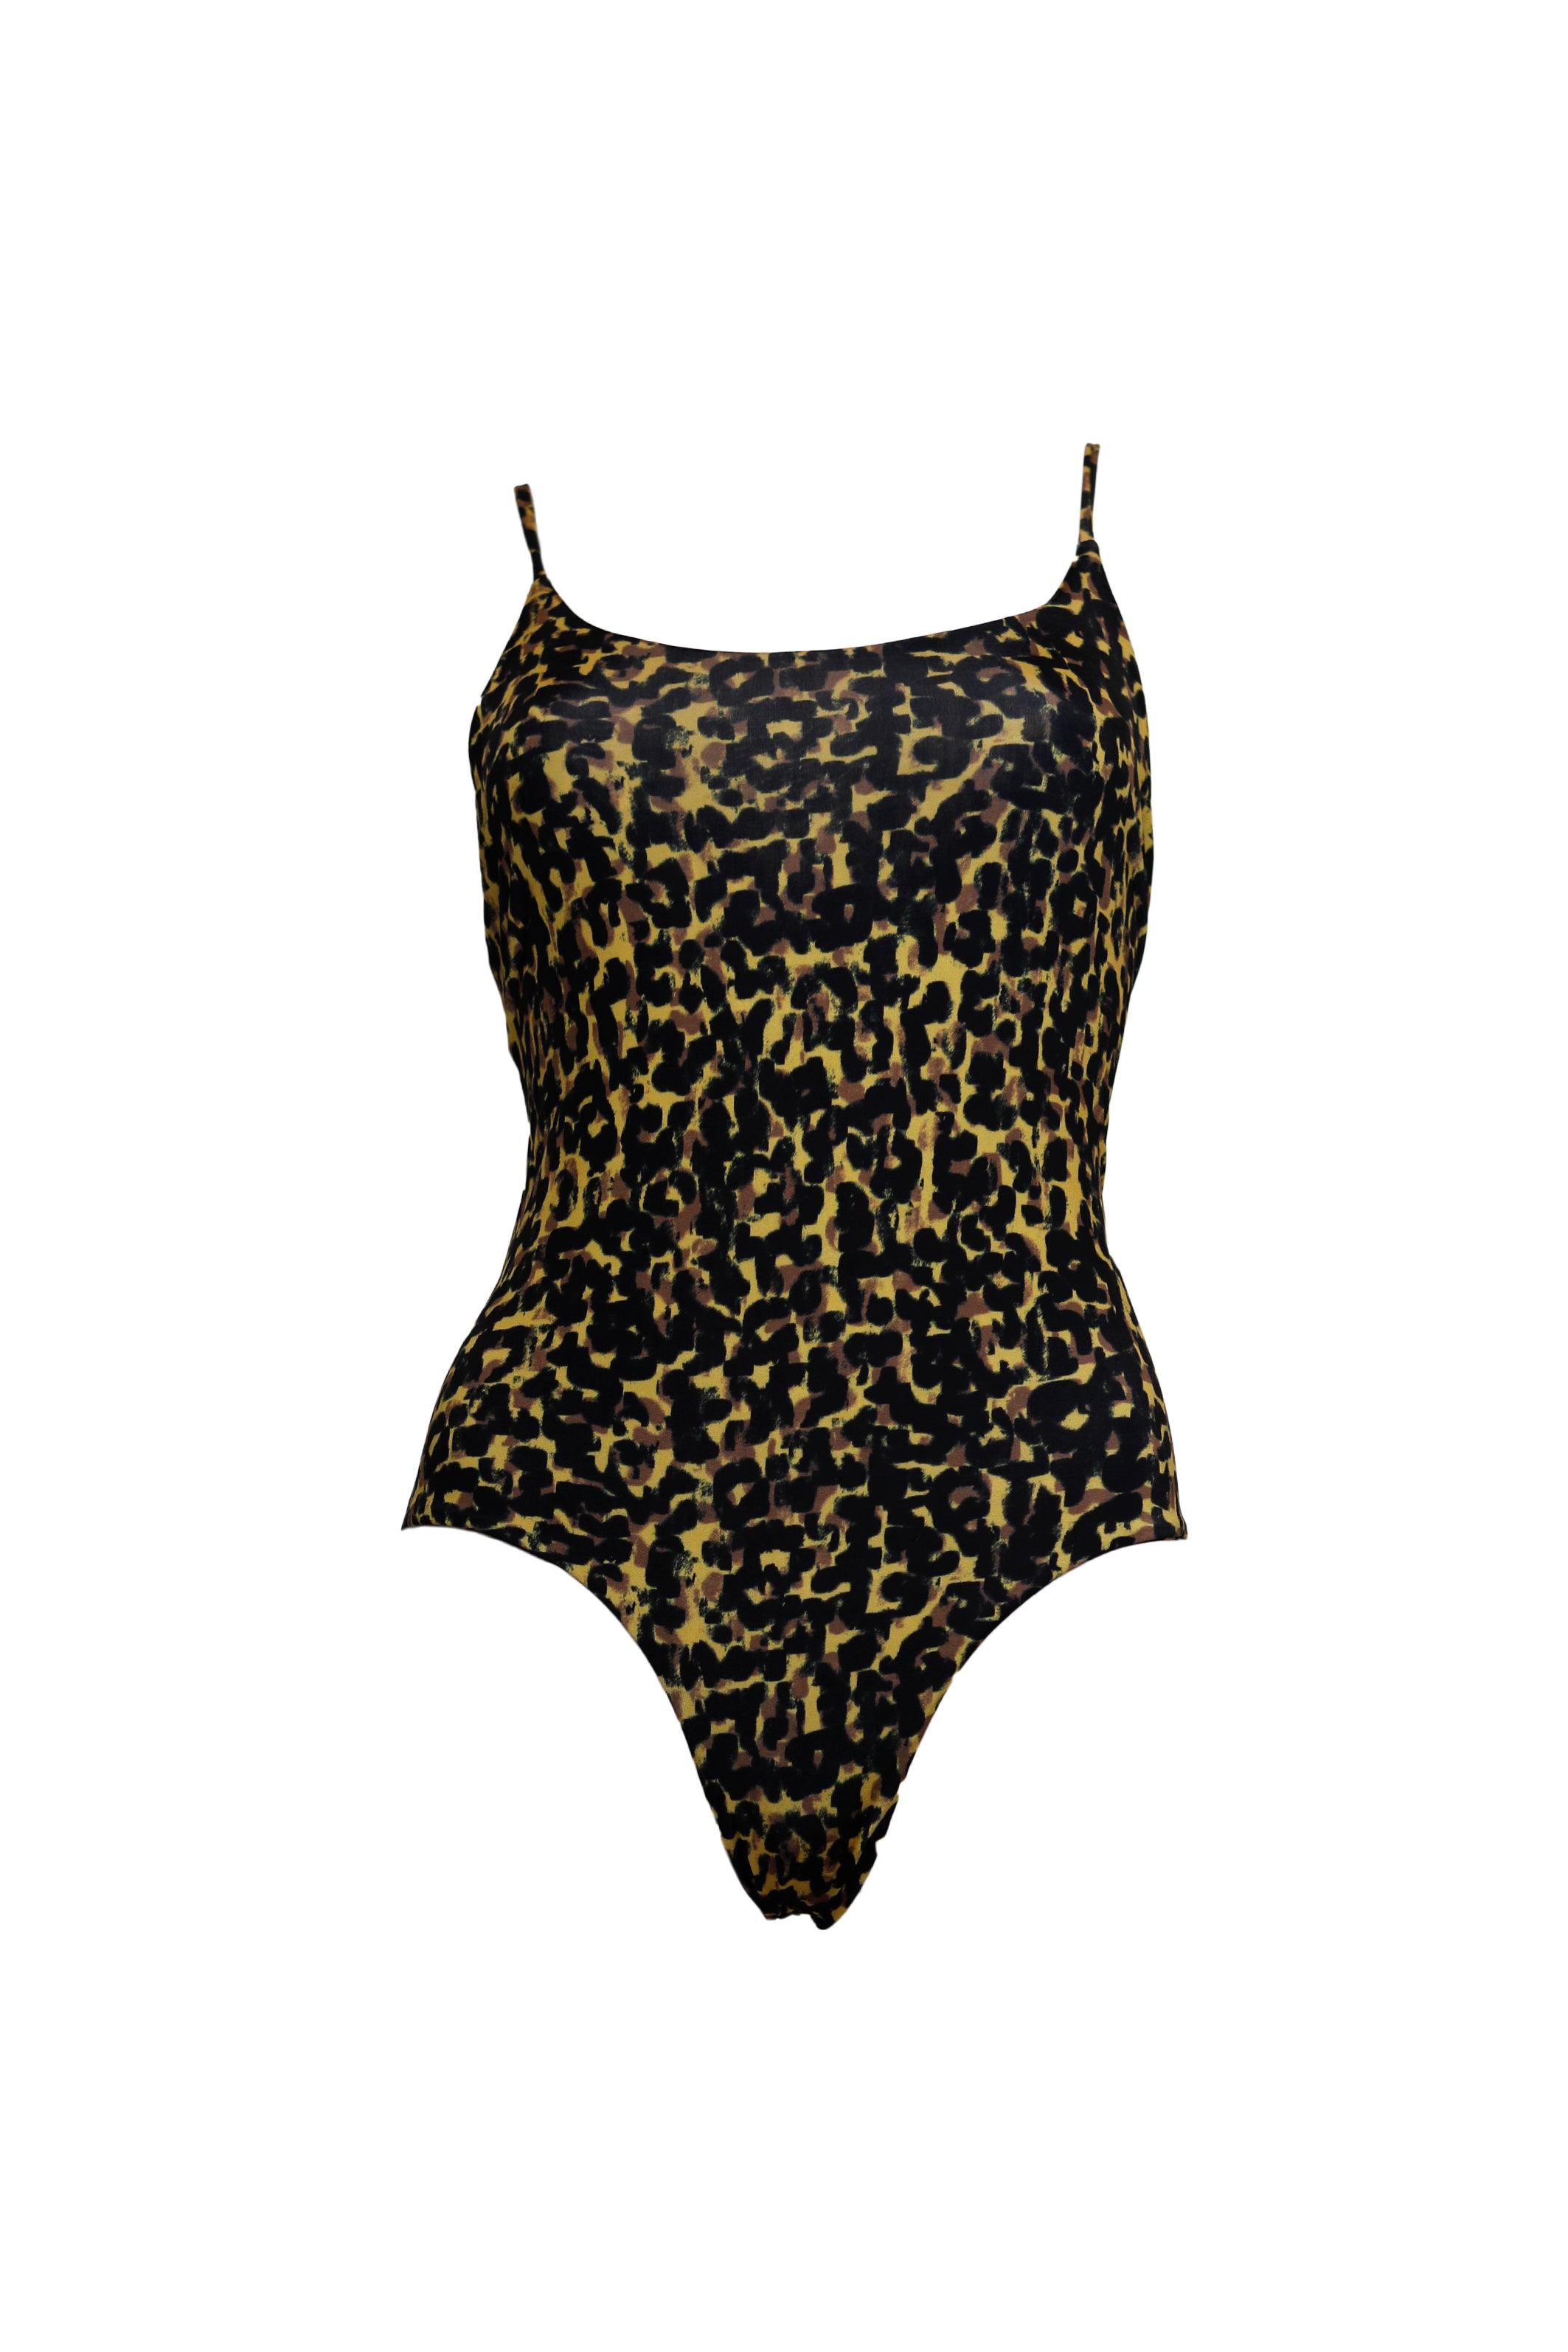 FEDERICA - one-piece swimsuit in yellow animal print lycra